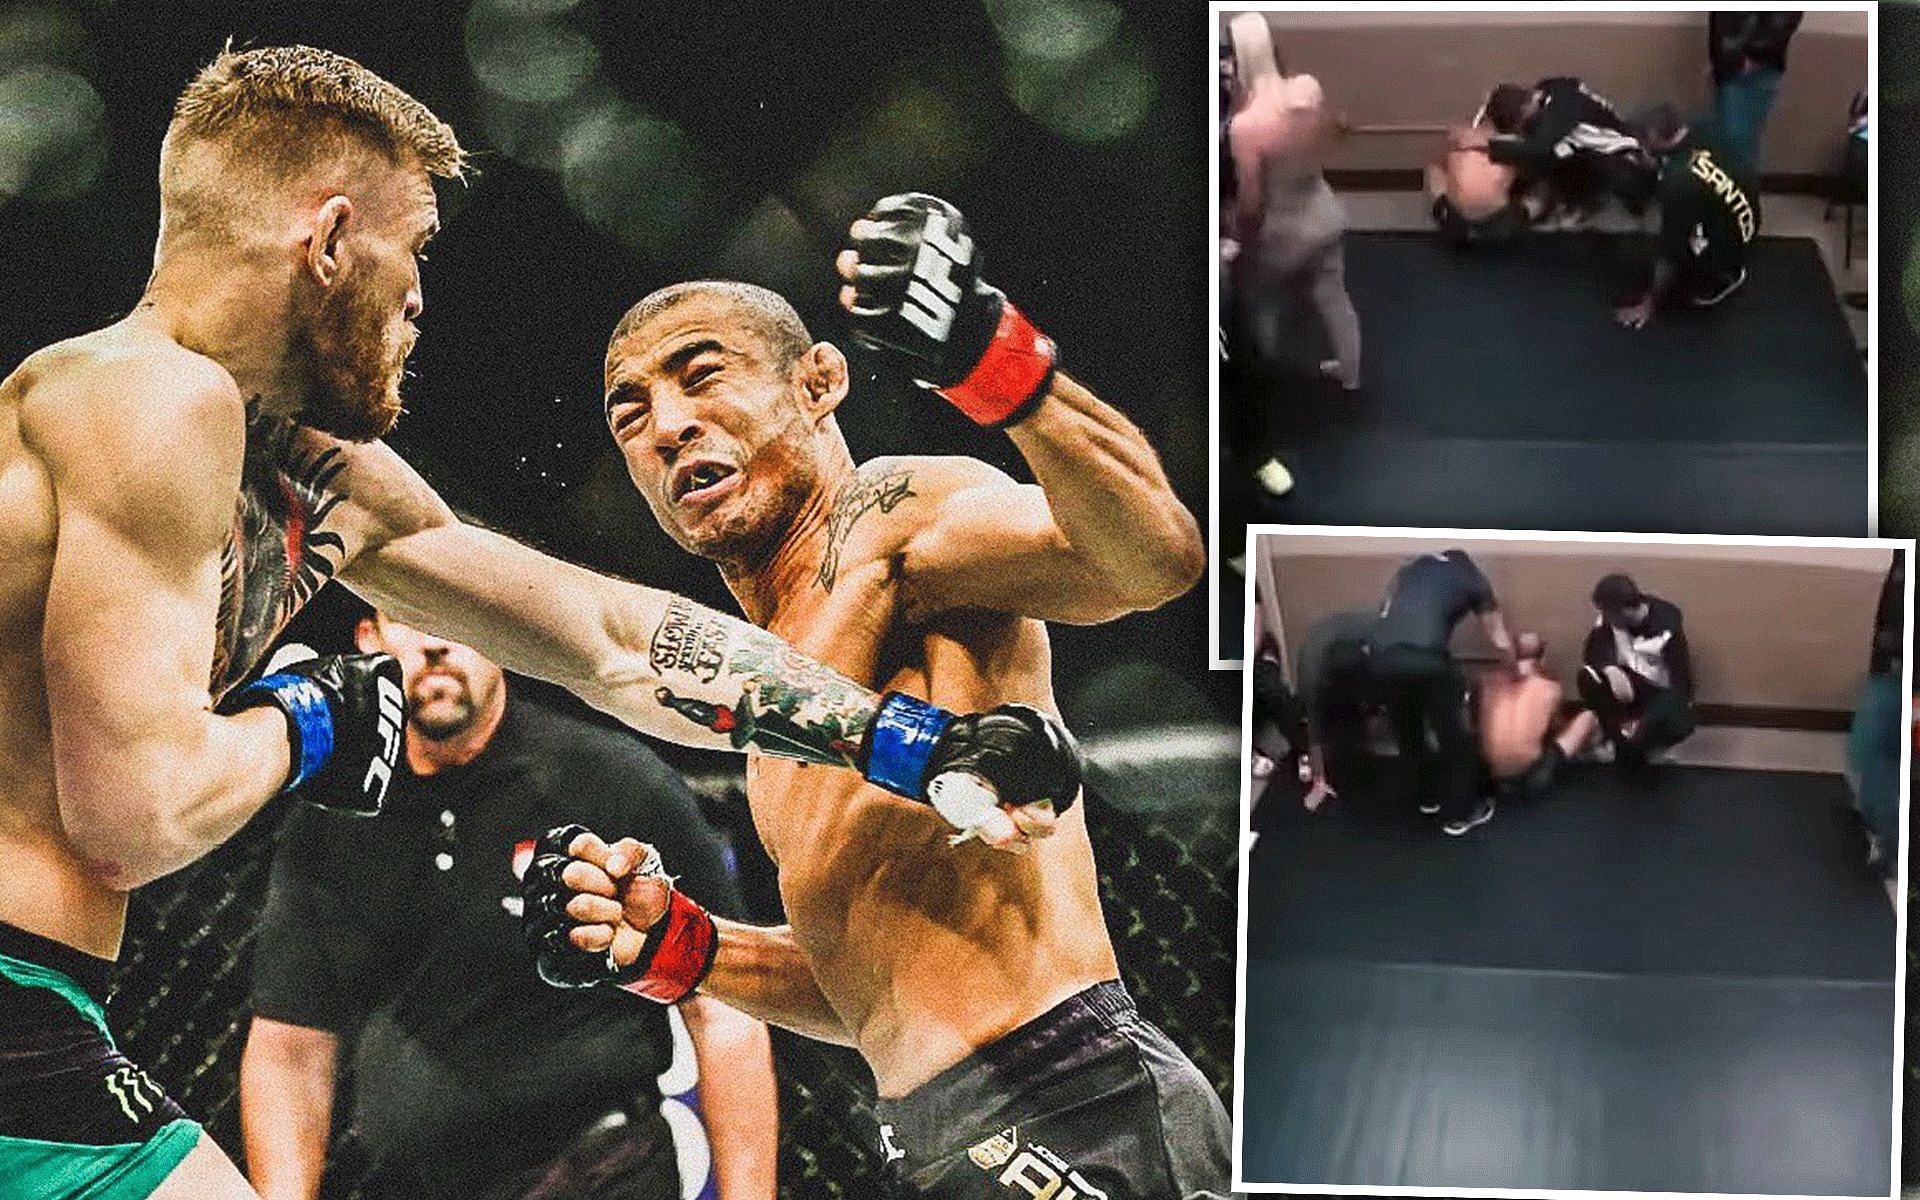 Jose Aldo broke down after his loss to Conor McGregor [left image via @sporf on Twitter; rest from one Punch on YouTube]